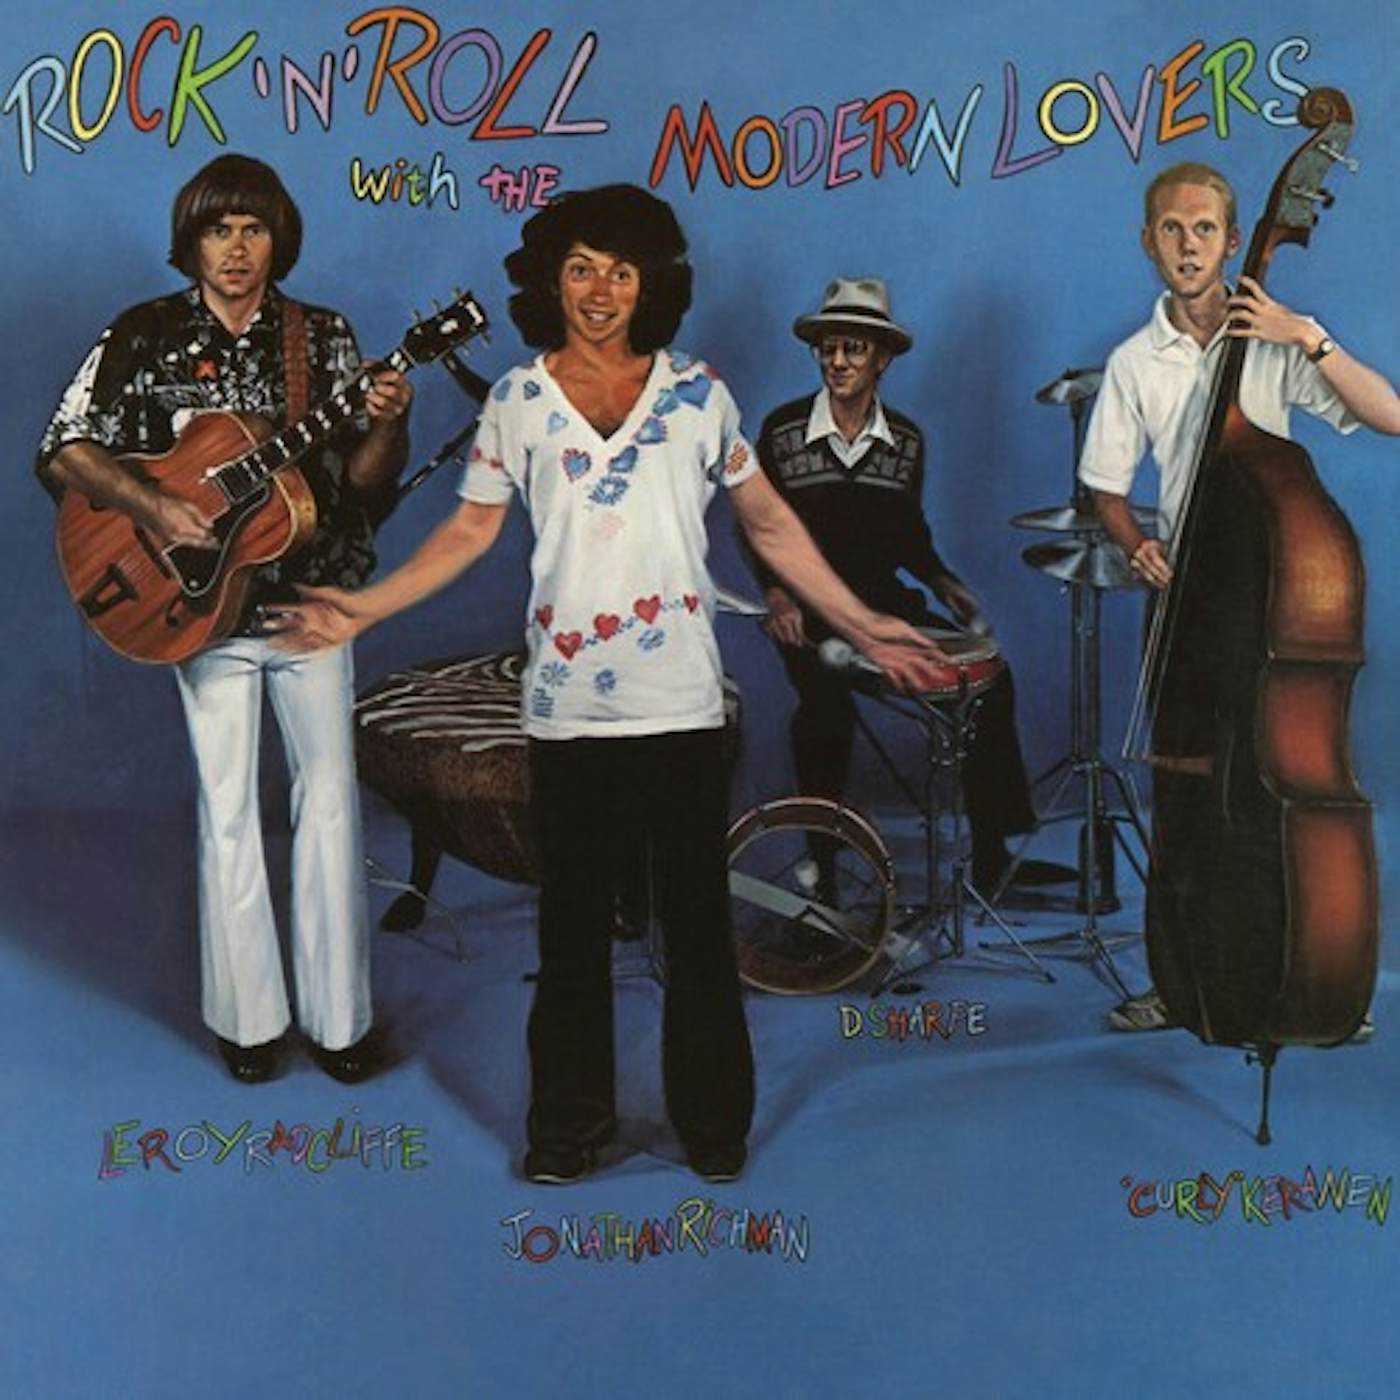 Jonathan Richman & The Modern Lovers ROCK N ROLL WITH THE MODERN LOVERS CD